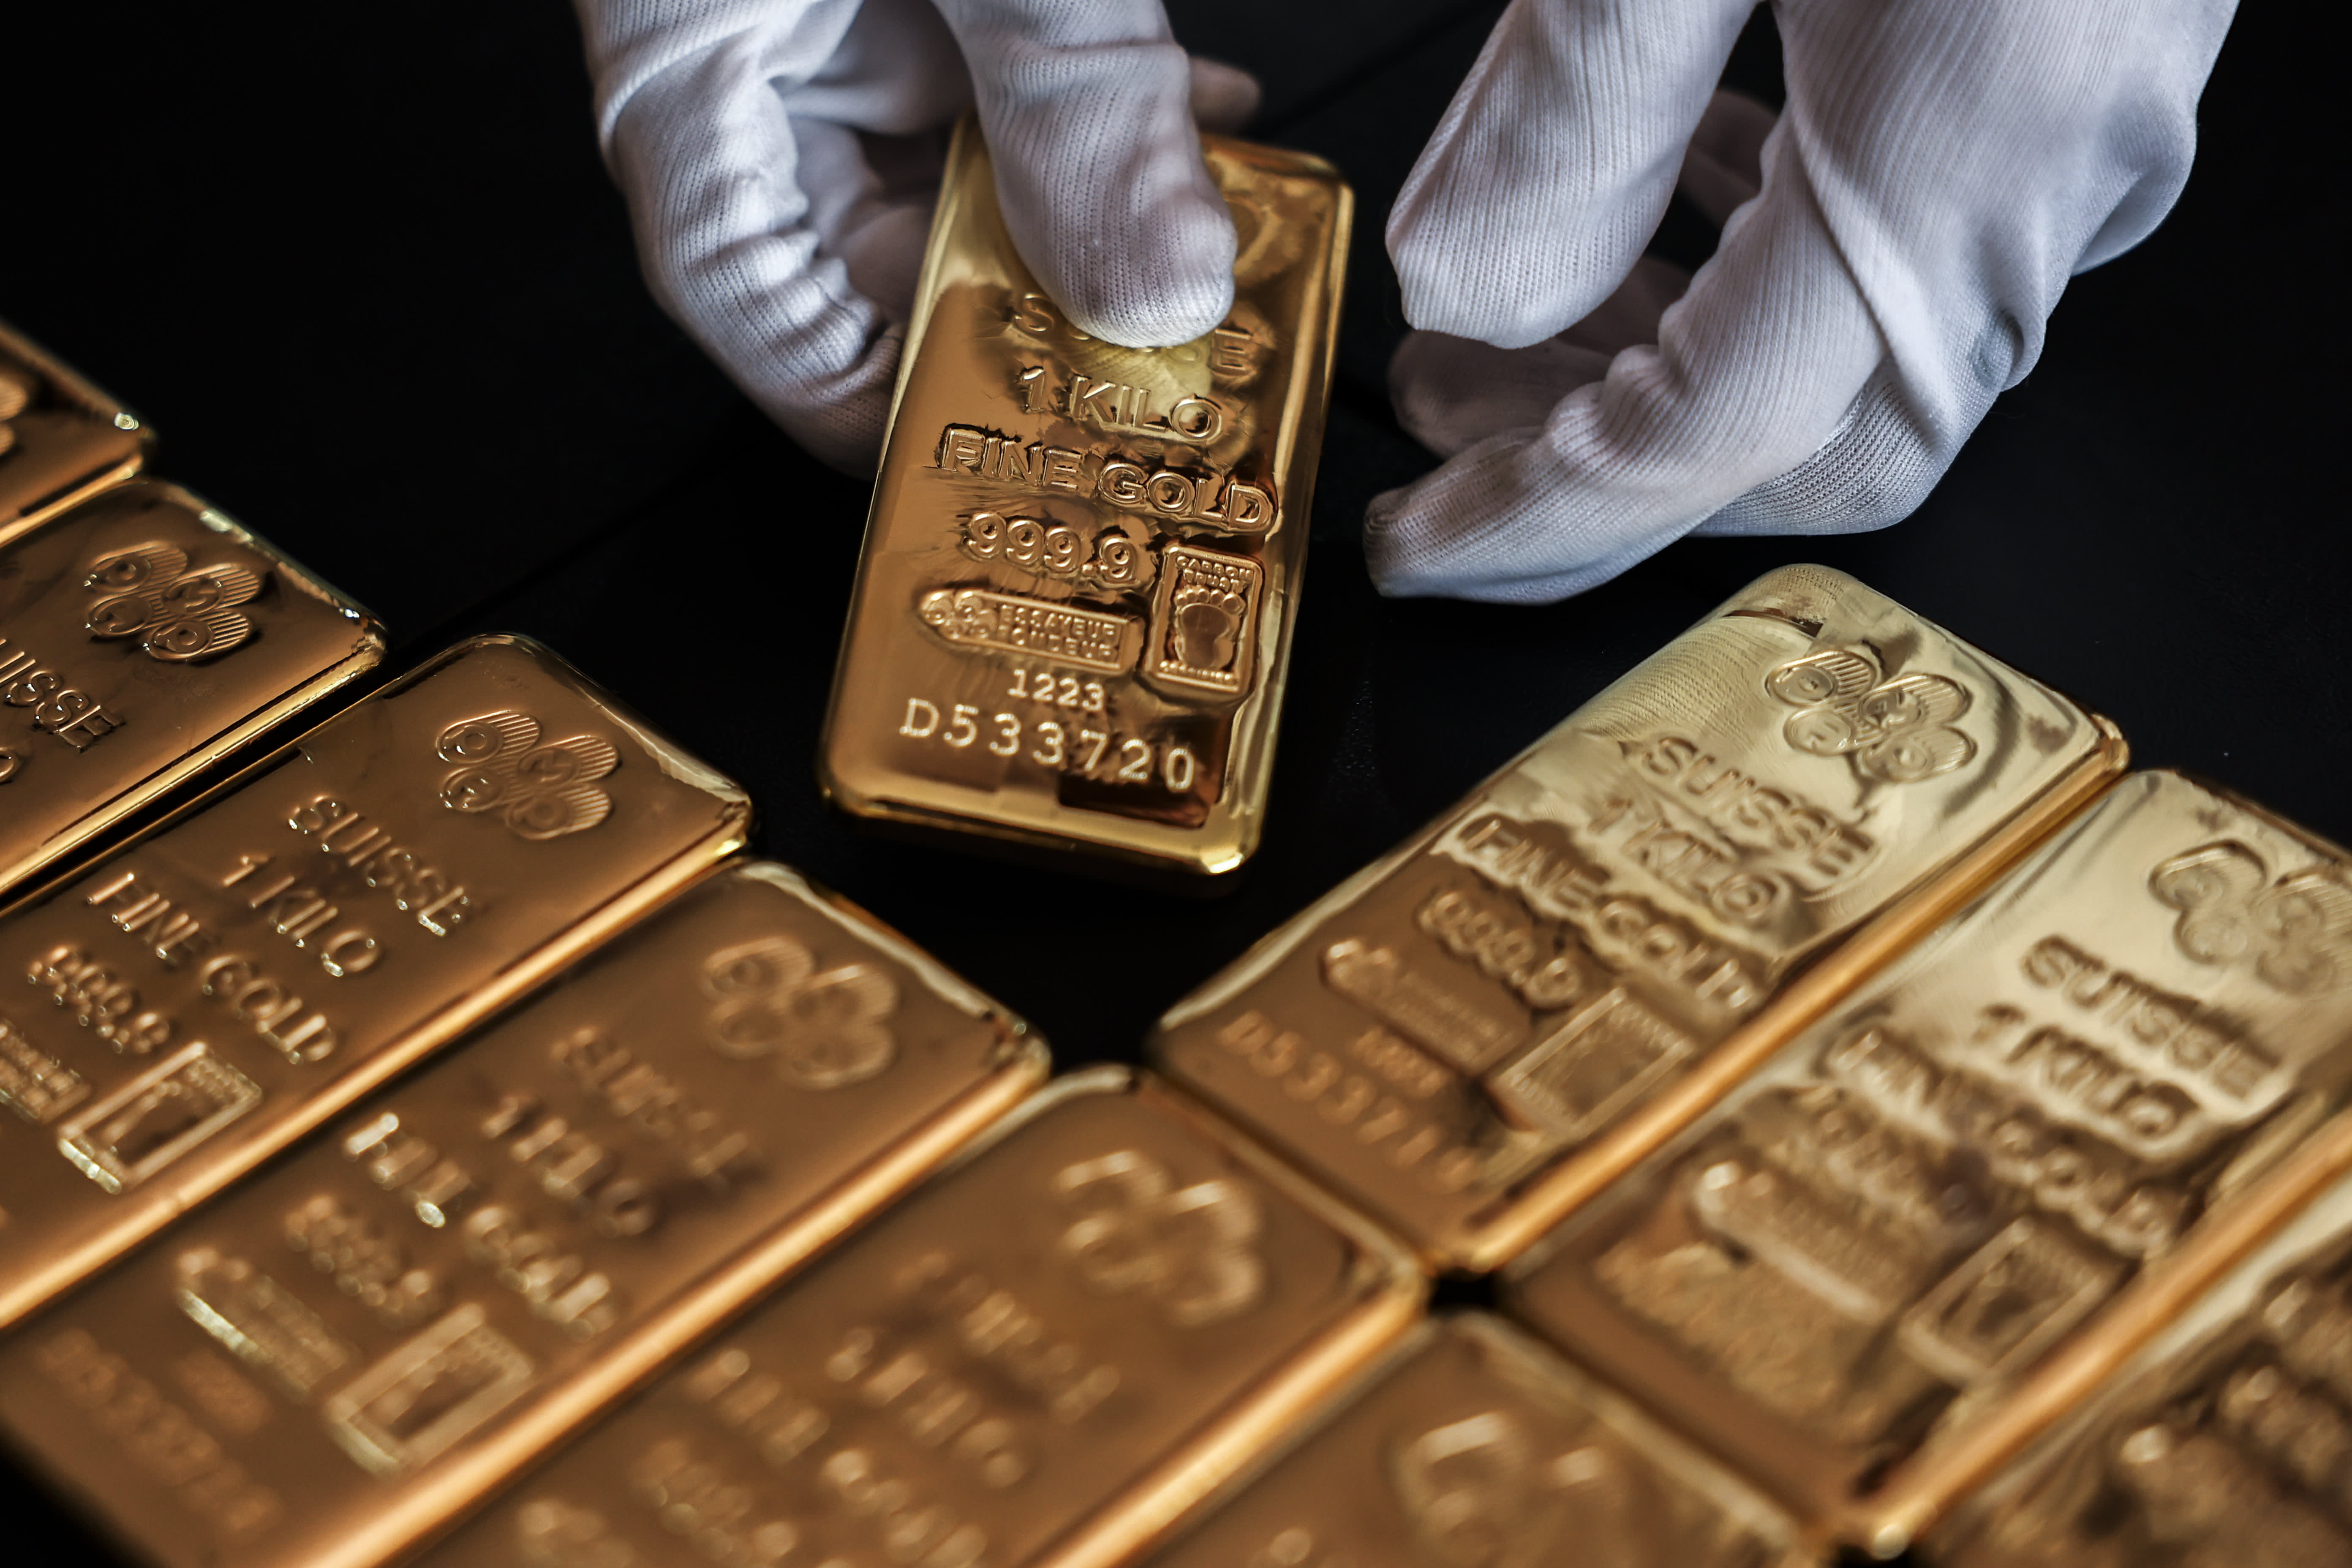 Gold prices decline following strong U.S. economic data indicating a resilient economy